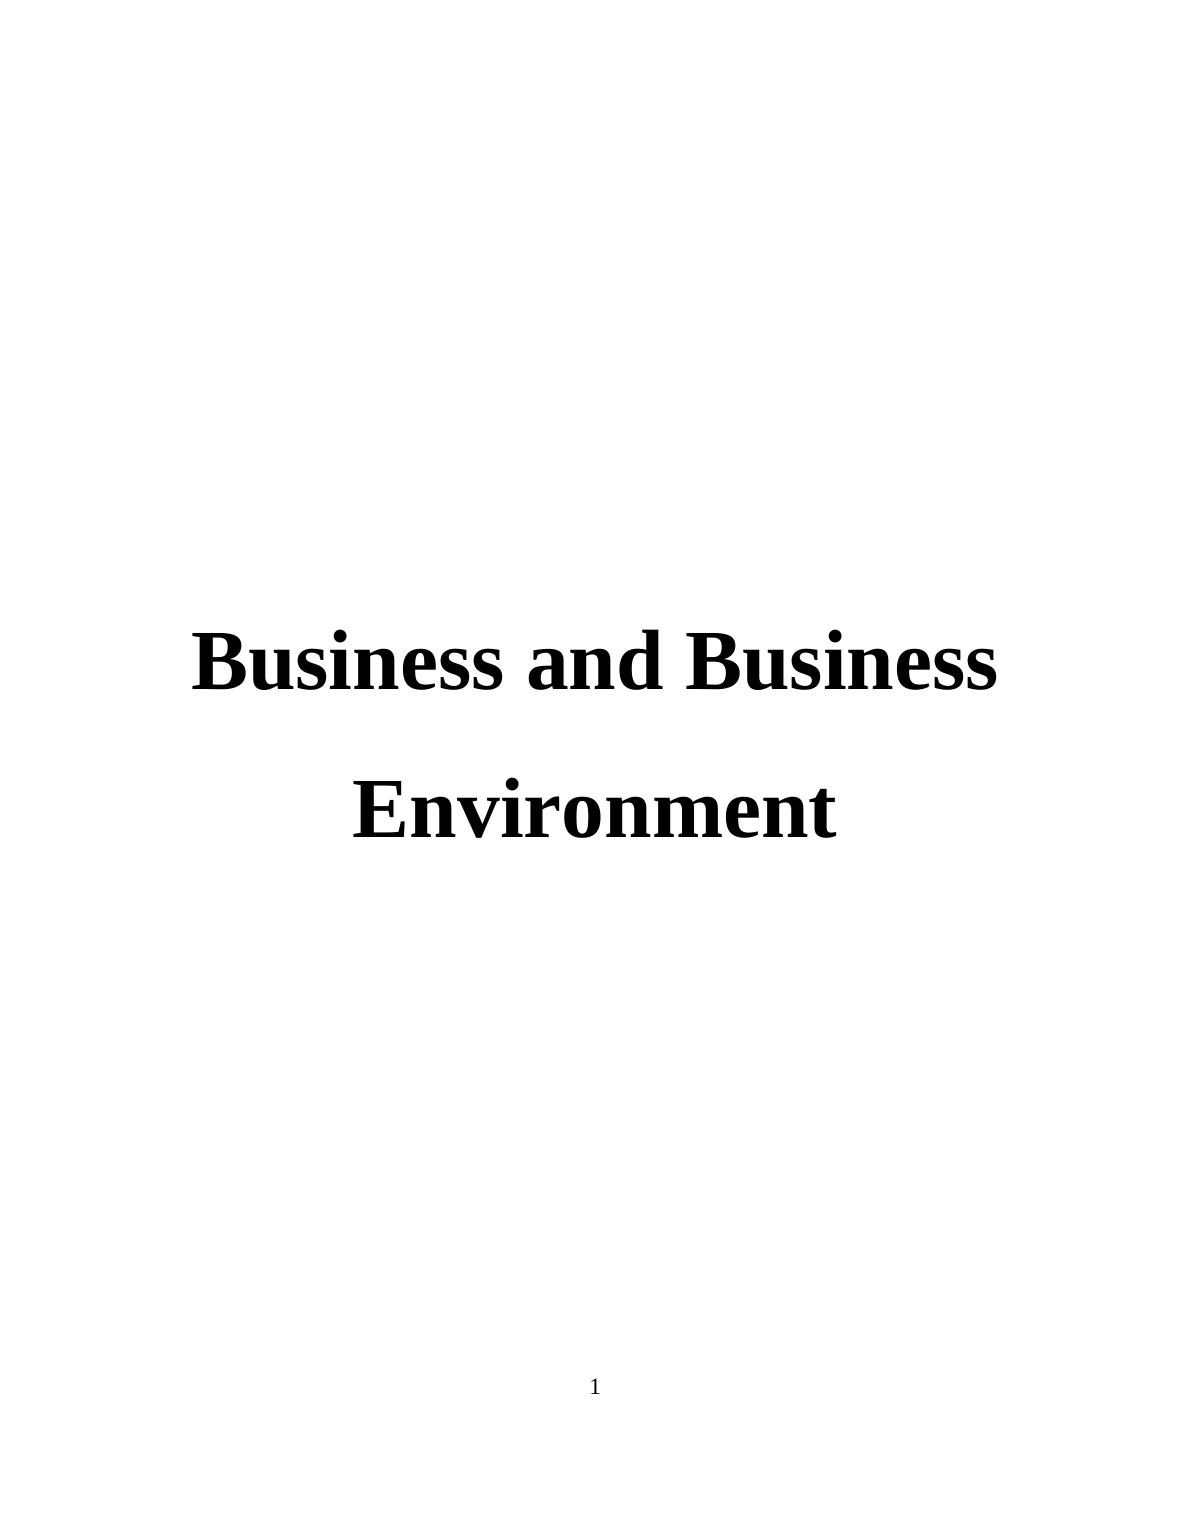 Case Study On Business Environment Of Tesco_1